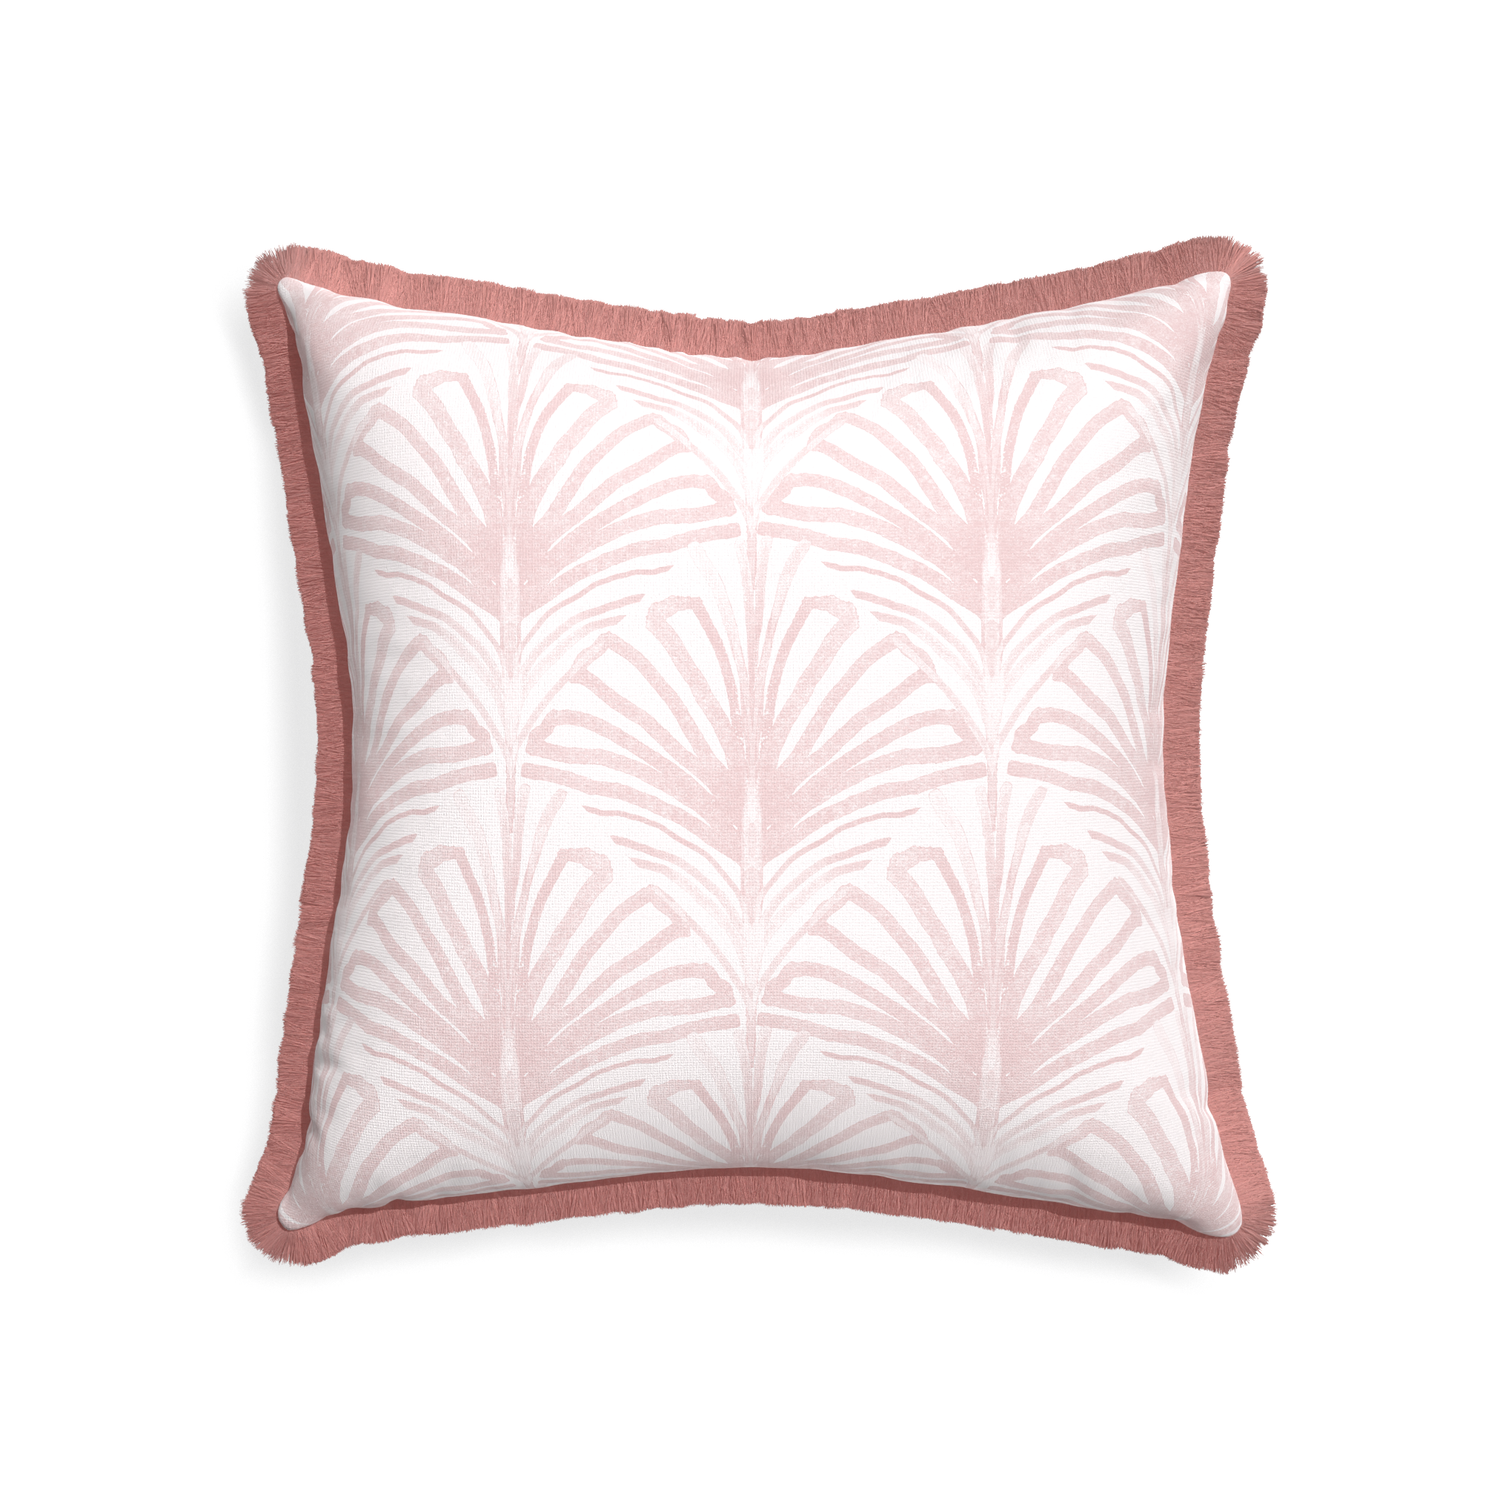 22-square suzy rose custom pillow with d fringe on white background